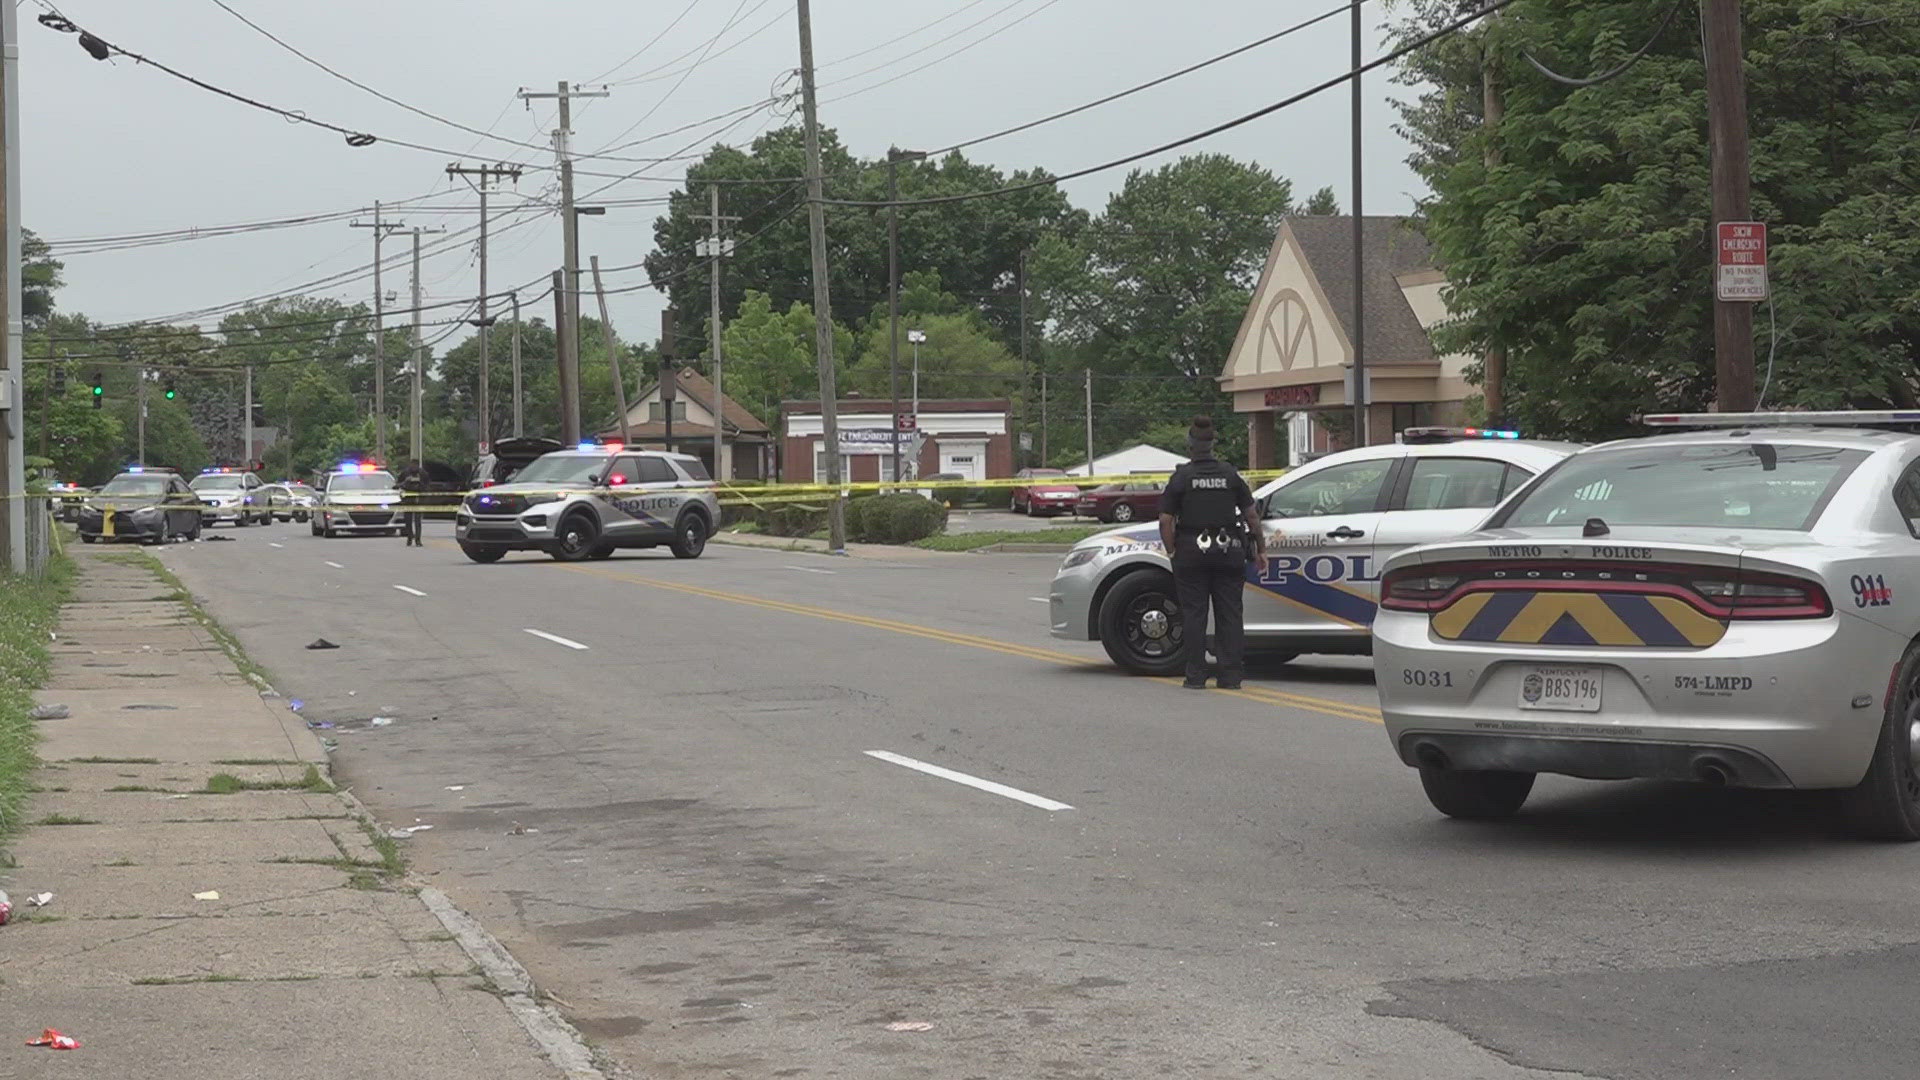 Police said the juvenile and another victim were shot in the area of Dixie Highway and West Hill Street Saturday afternoon.